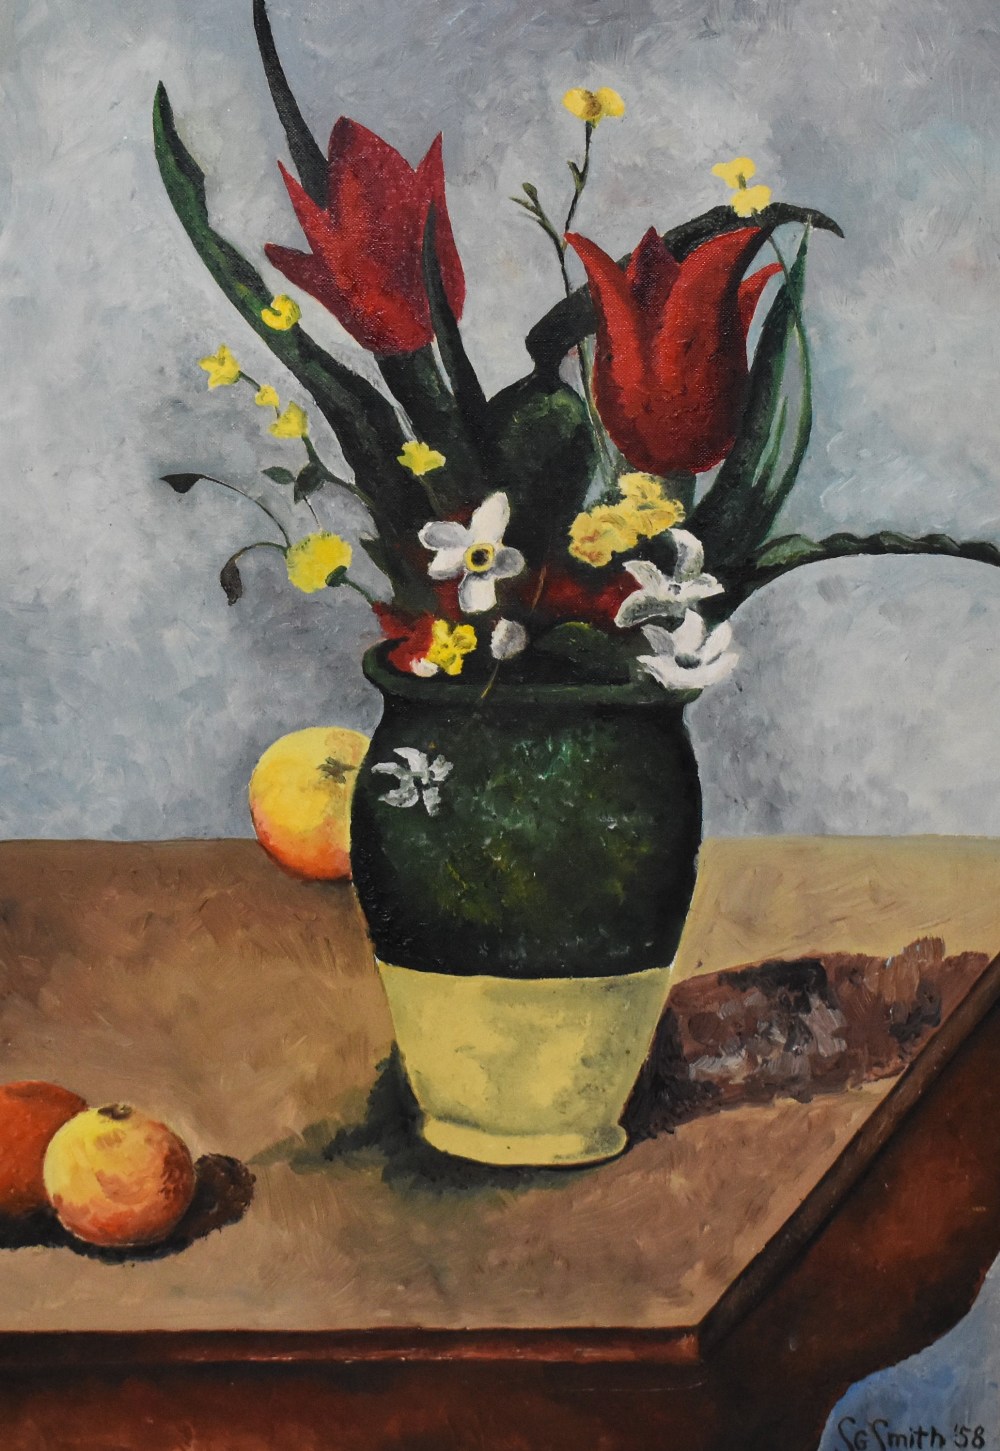 SG Smith (20th Century), oil on board, A still life arrangement with flowers and fruit, a mid-